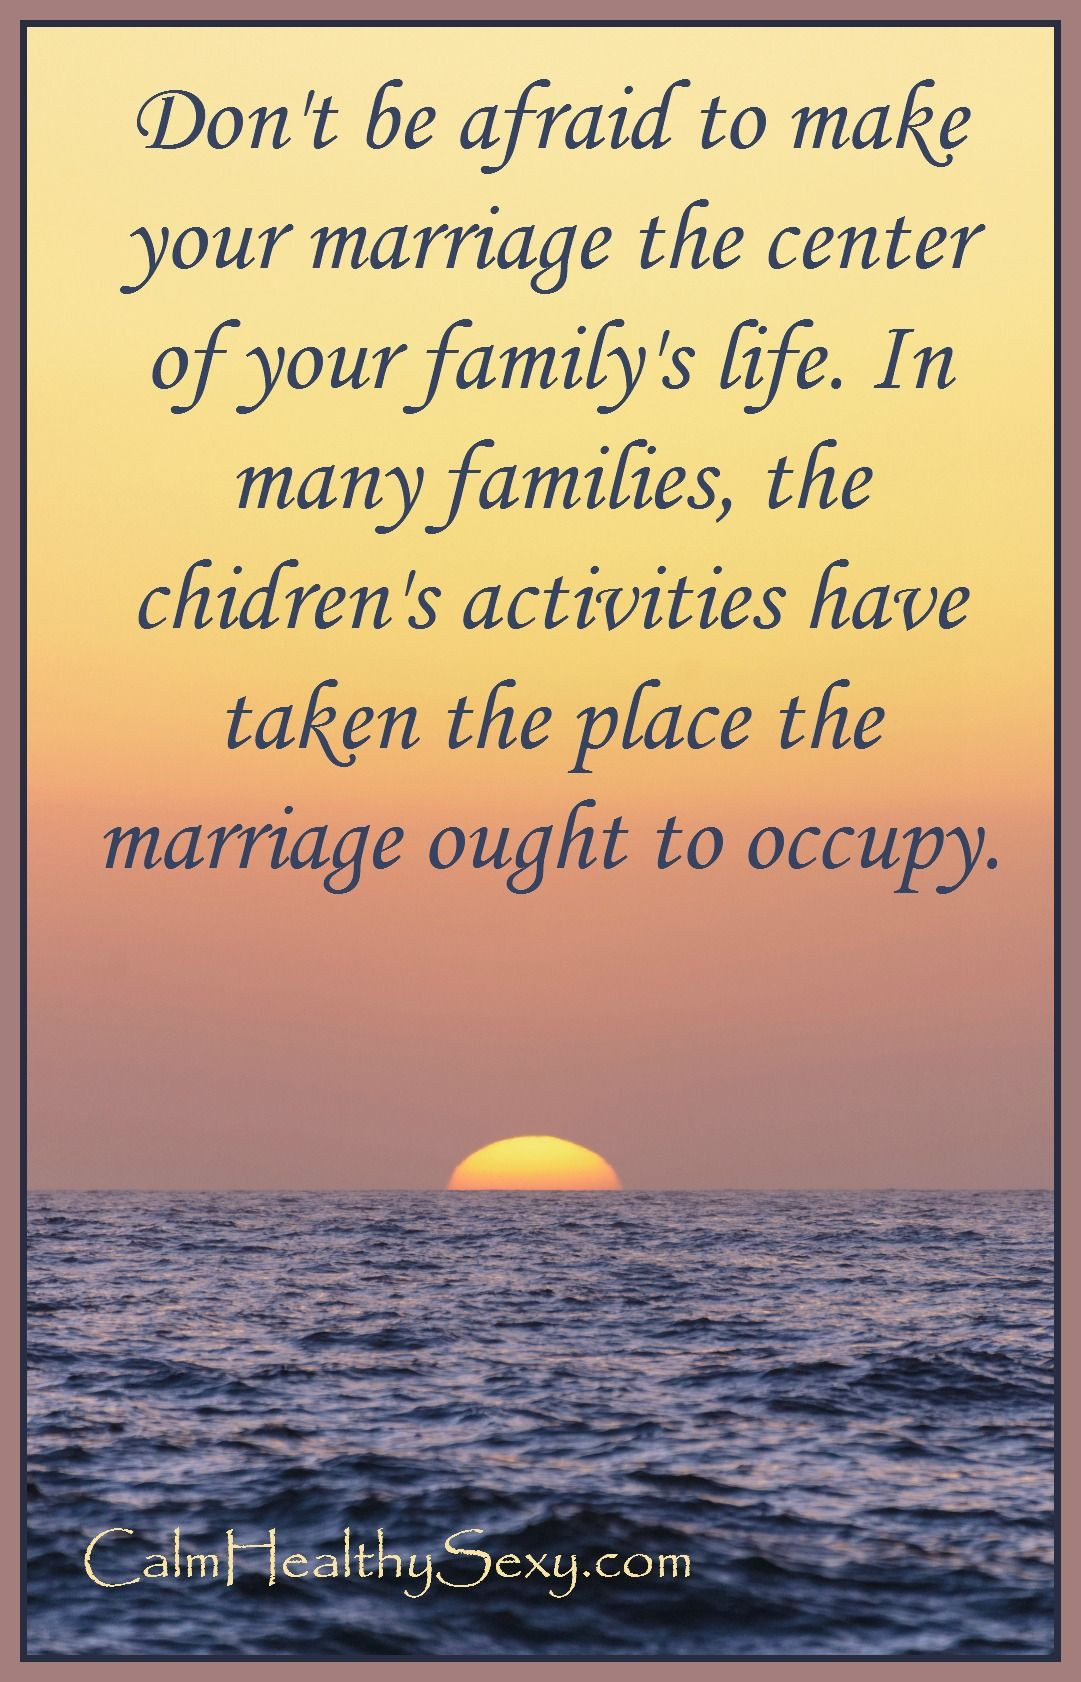 Marriage Pic Quotes
 17 Inspirational Marriage Quotes and Love Quotes Free